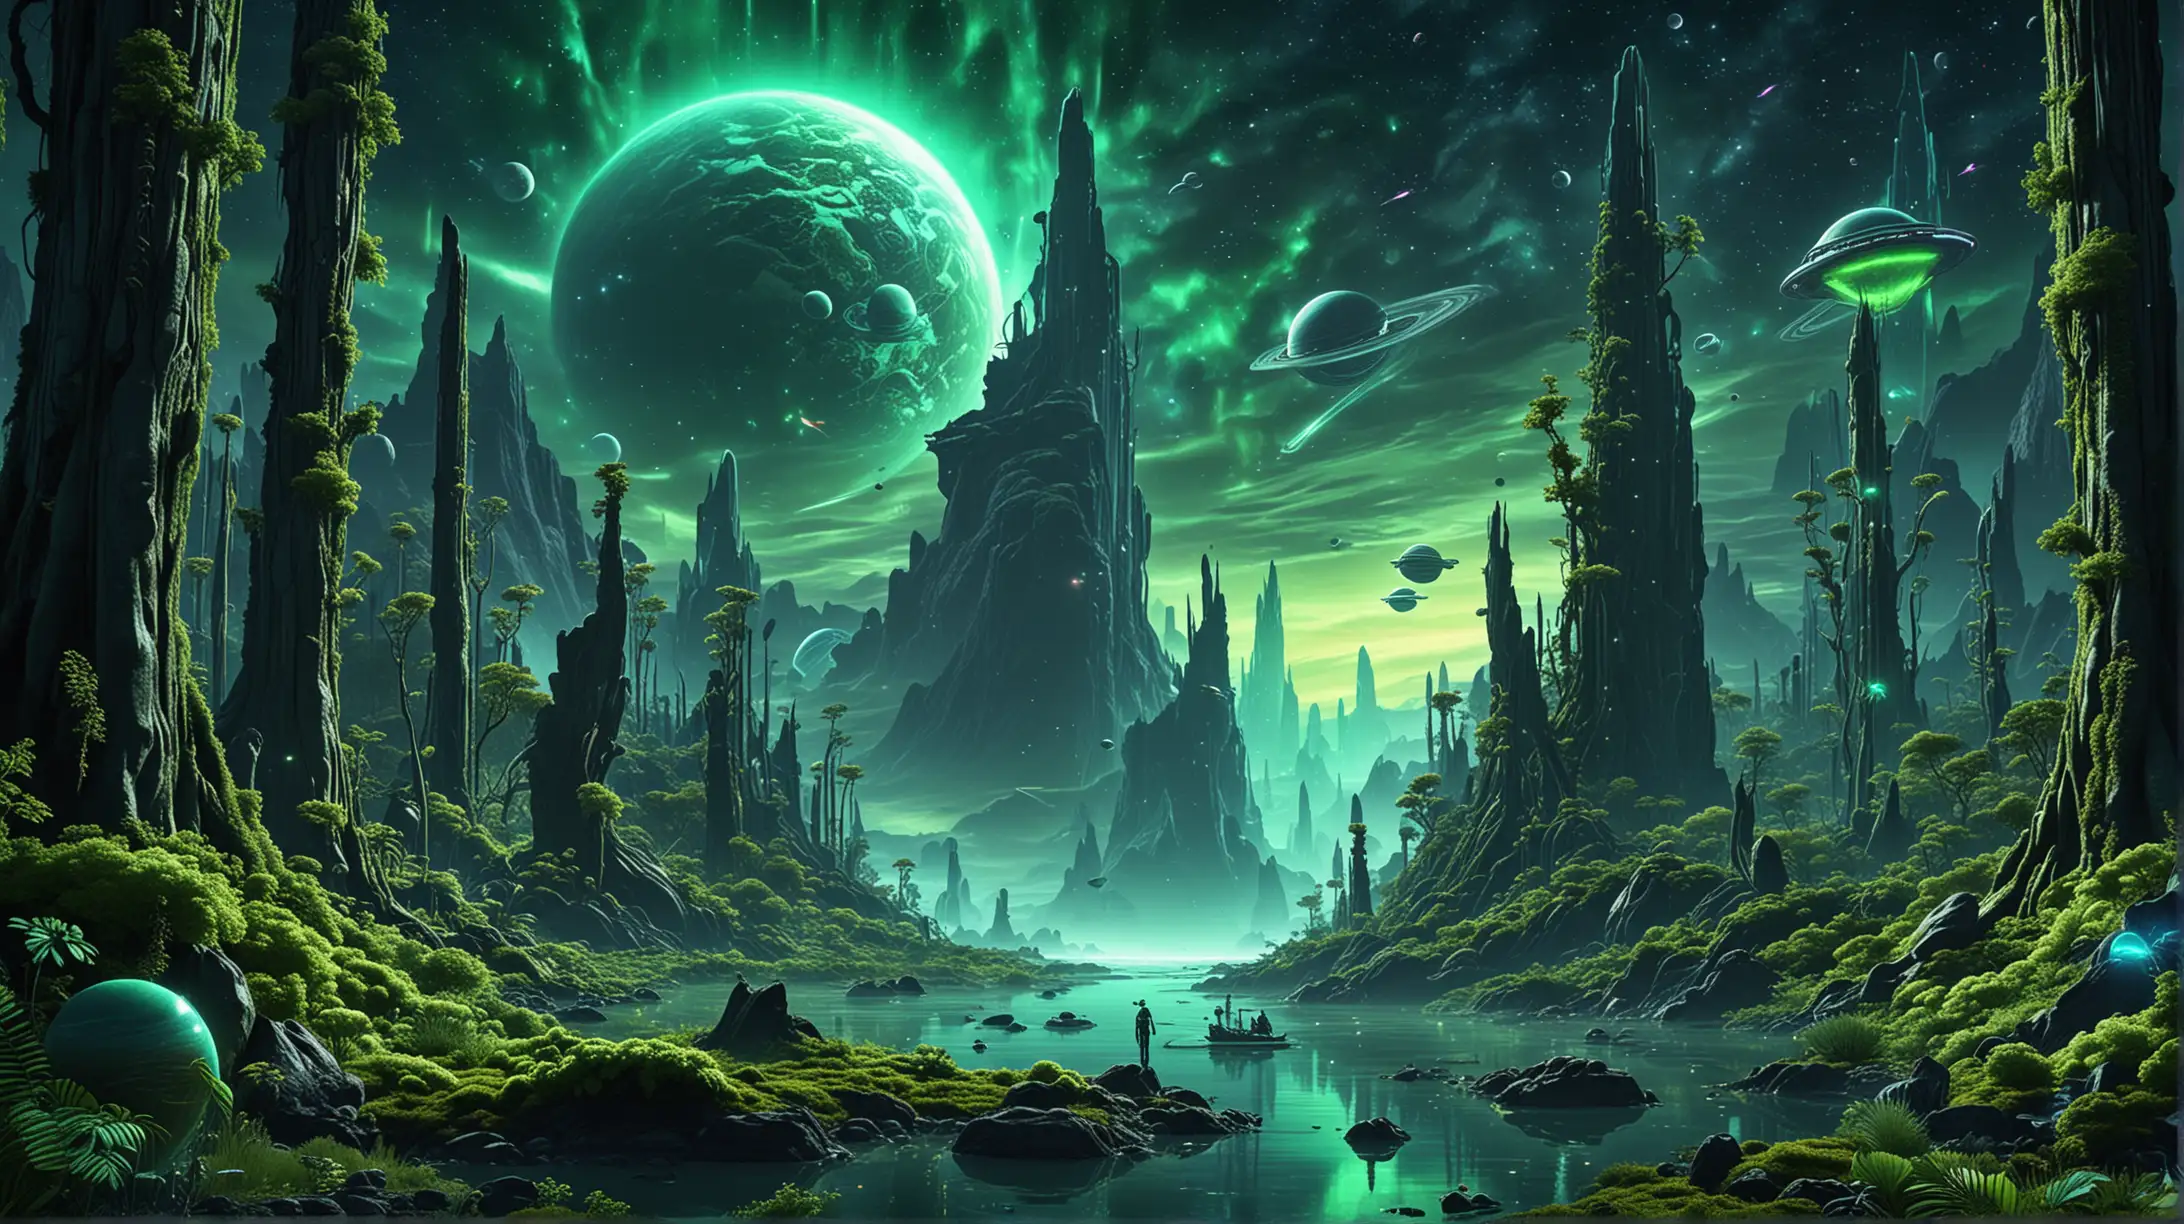 Vibrant Green Alien Planet Landscape with Towering Trees and Futuristic Explorers